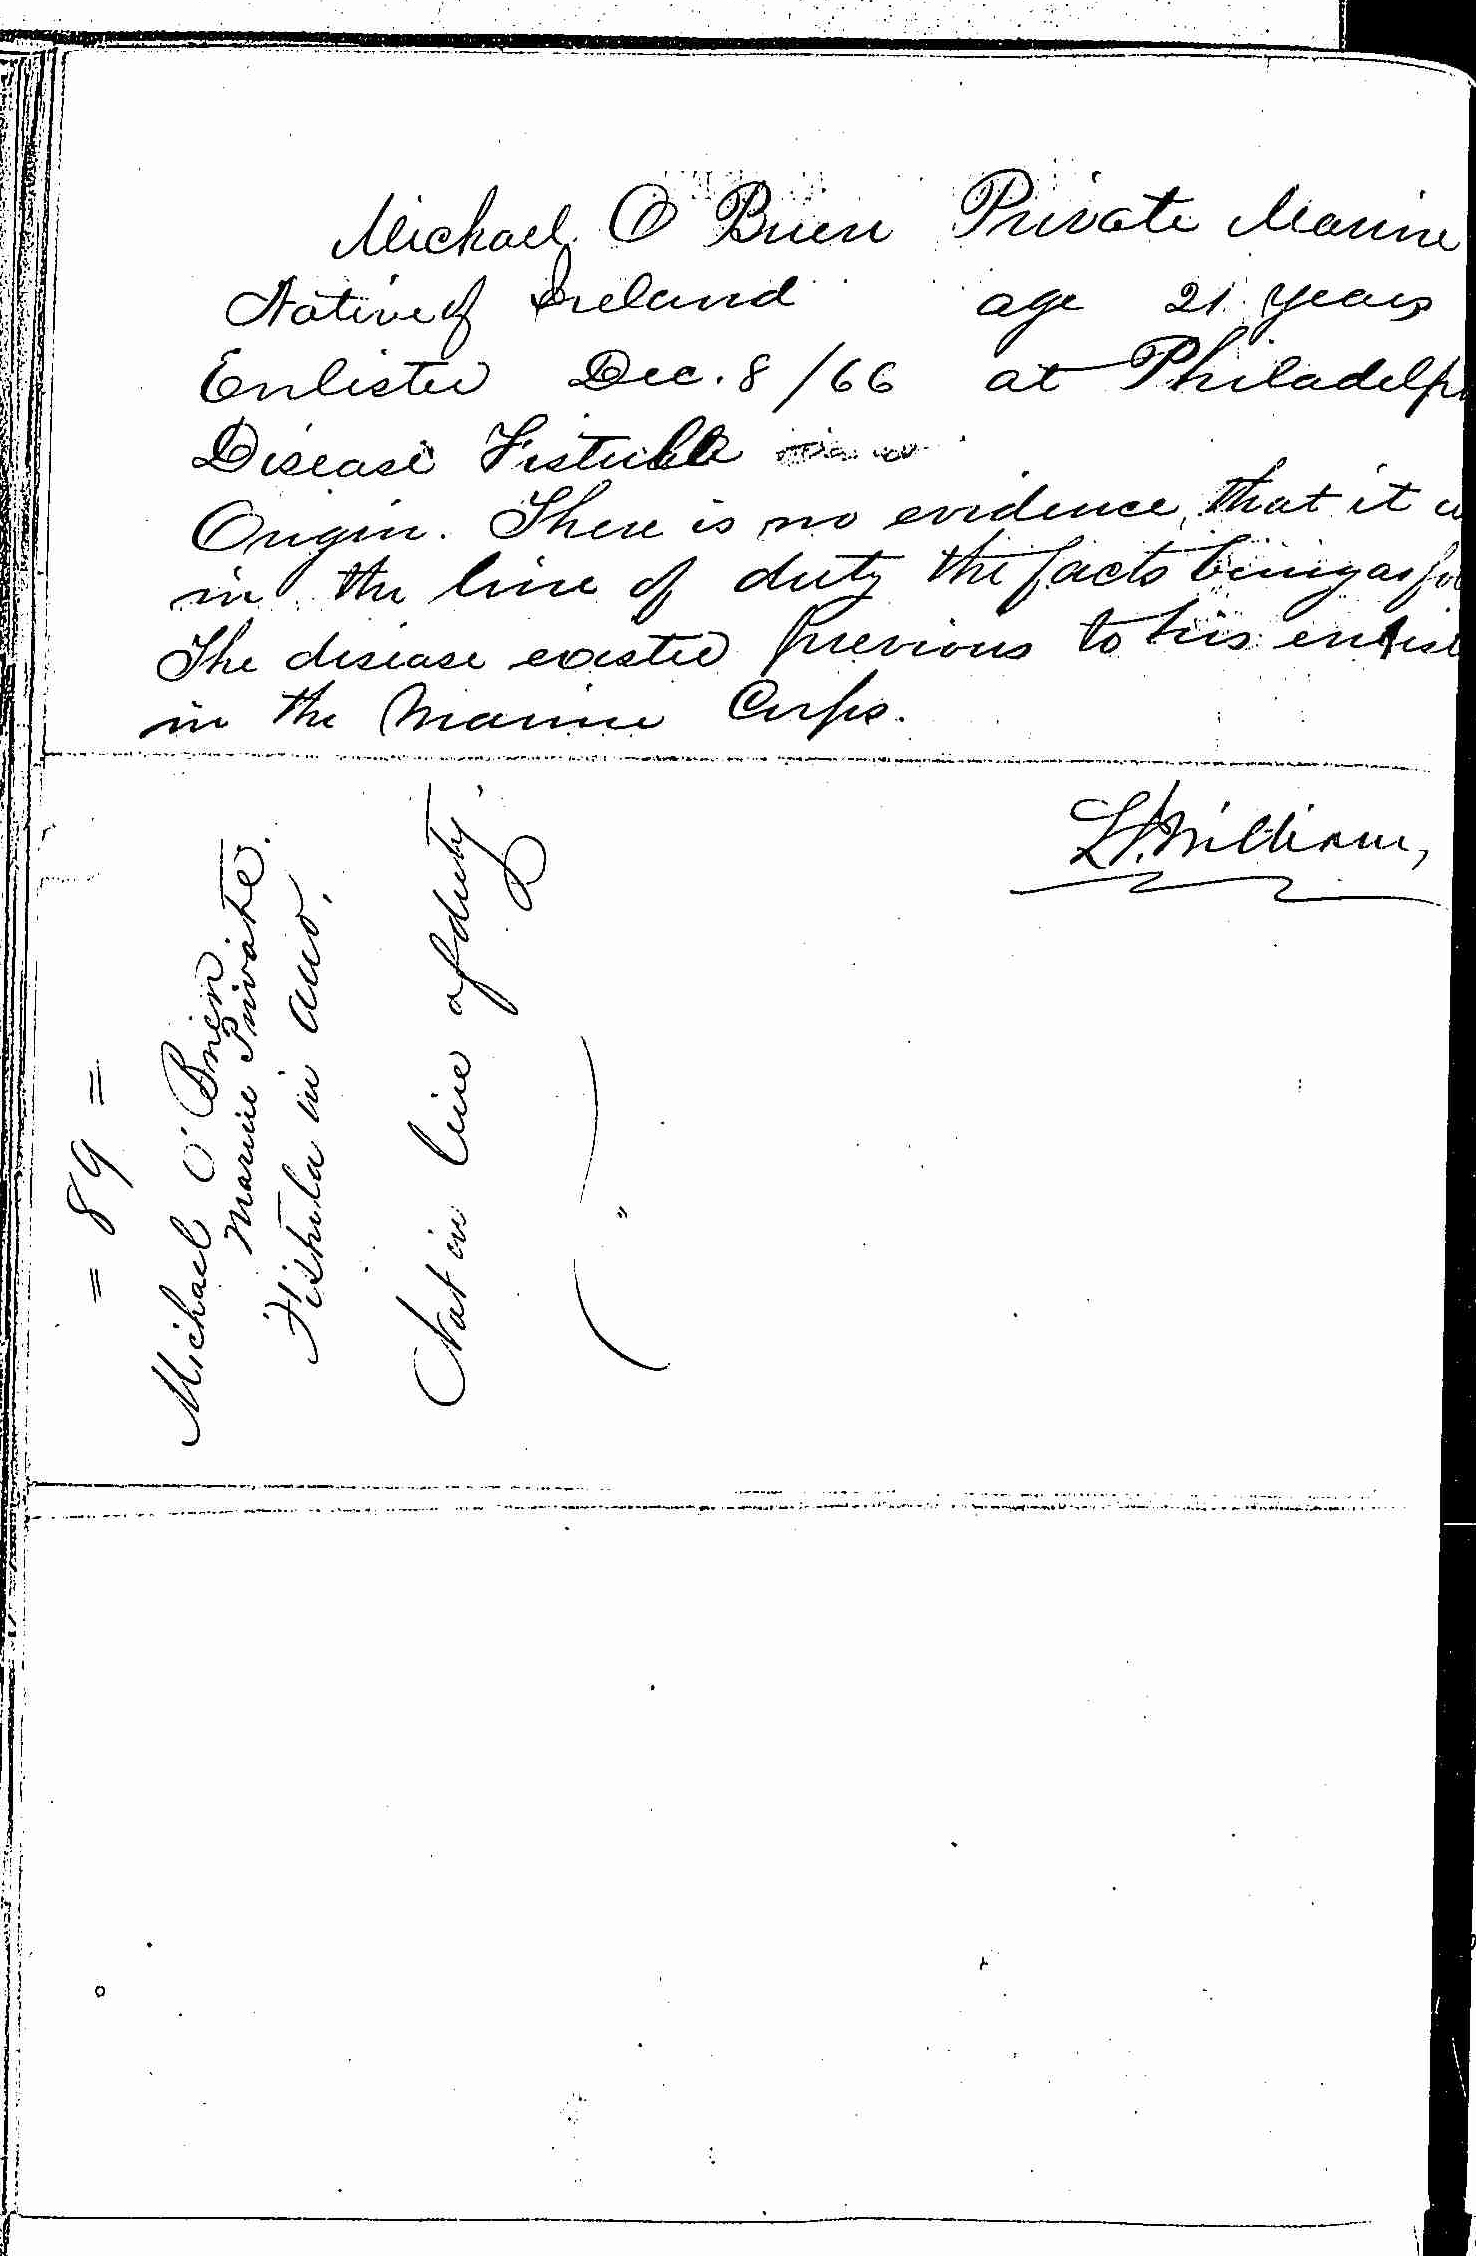 Entry for Michael O'Brien (page 2 of 2) in the log Hospital Tickets and Case Papers - Naval Hospital - Washington, D.C. - 1865-68